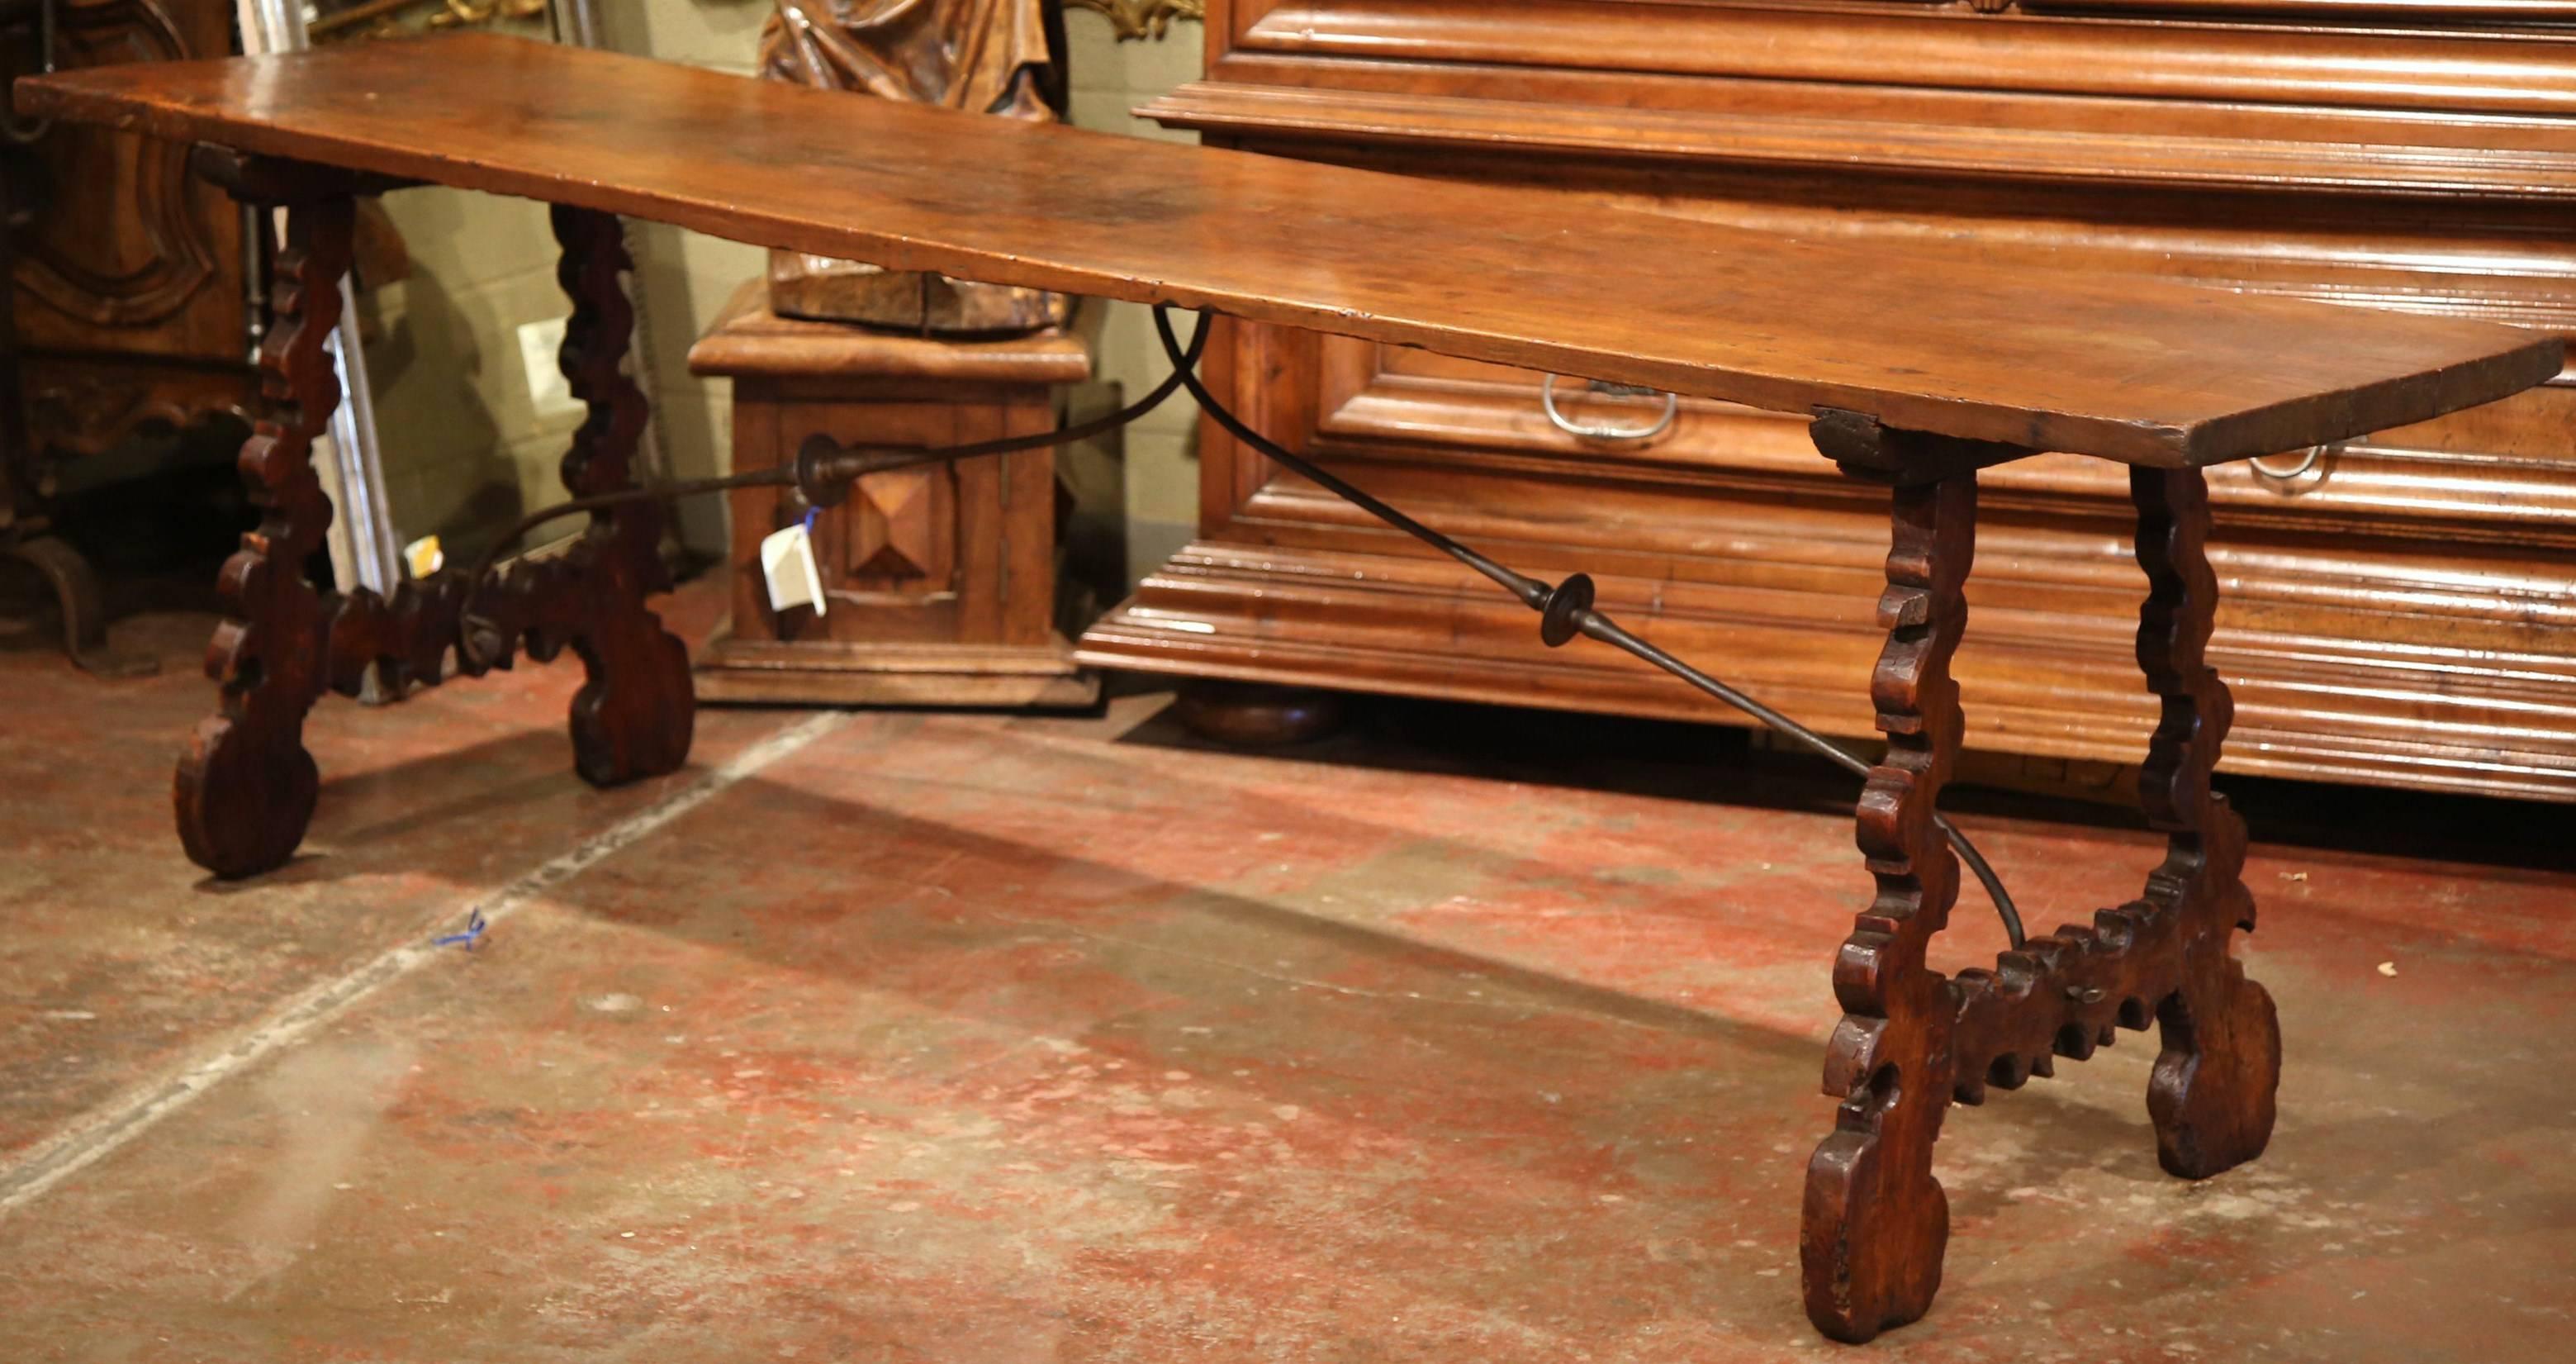 This long and narrow antique fruitwood table was crafted in Spain, circa 1780. The elegant table features two carved, A-shape legs built of pine, which are connected in the centre with a forged black wrought iron stretcher for stability and